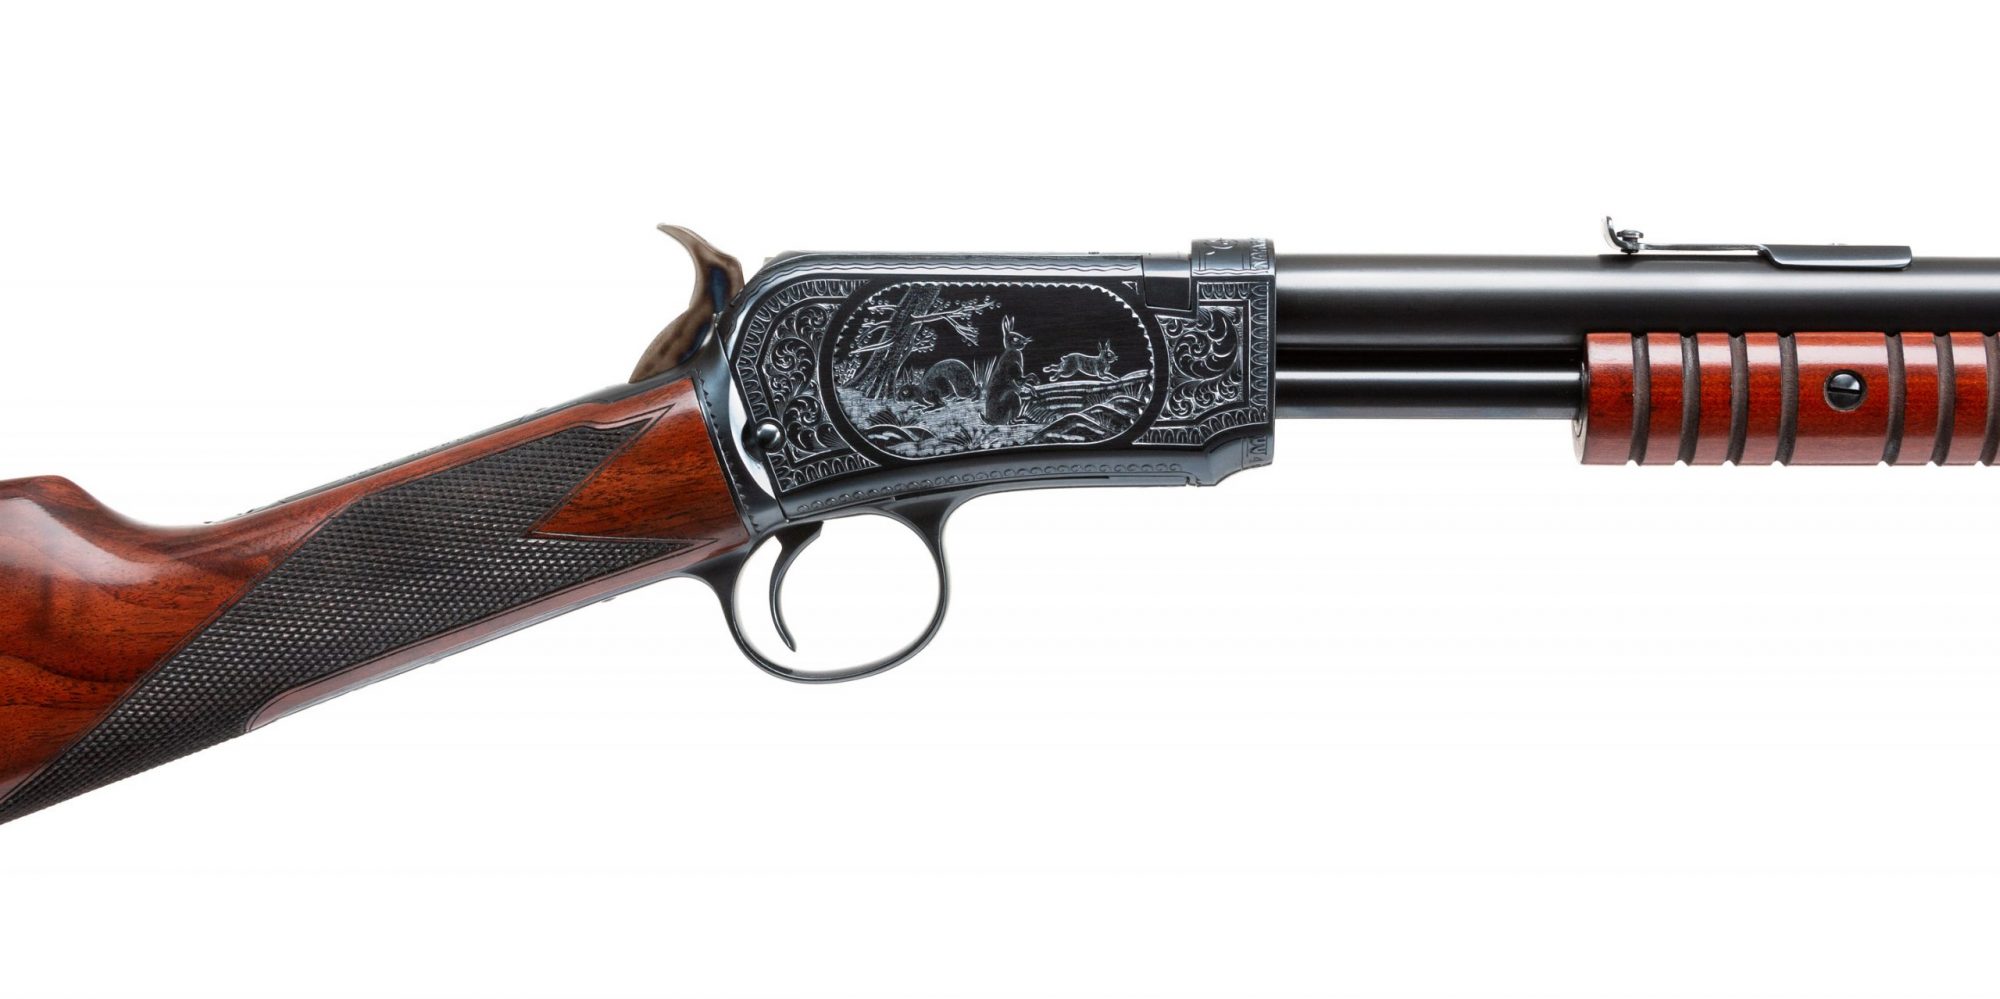 Photo of a restored engraved Winchester Model 1906 rifle by Turnbull Restoration of Bloomfield, NY